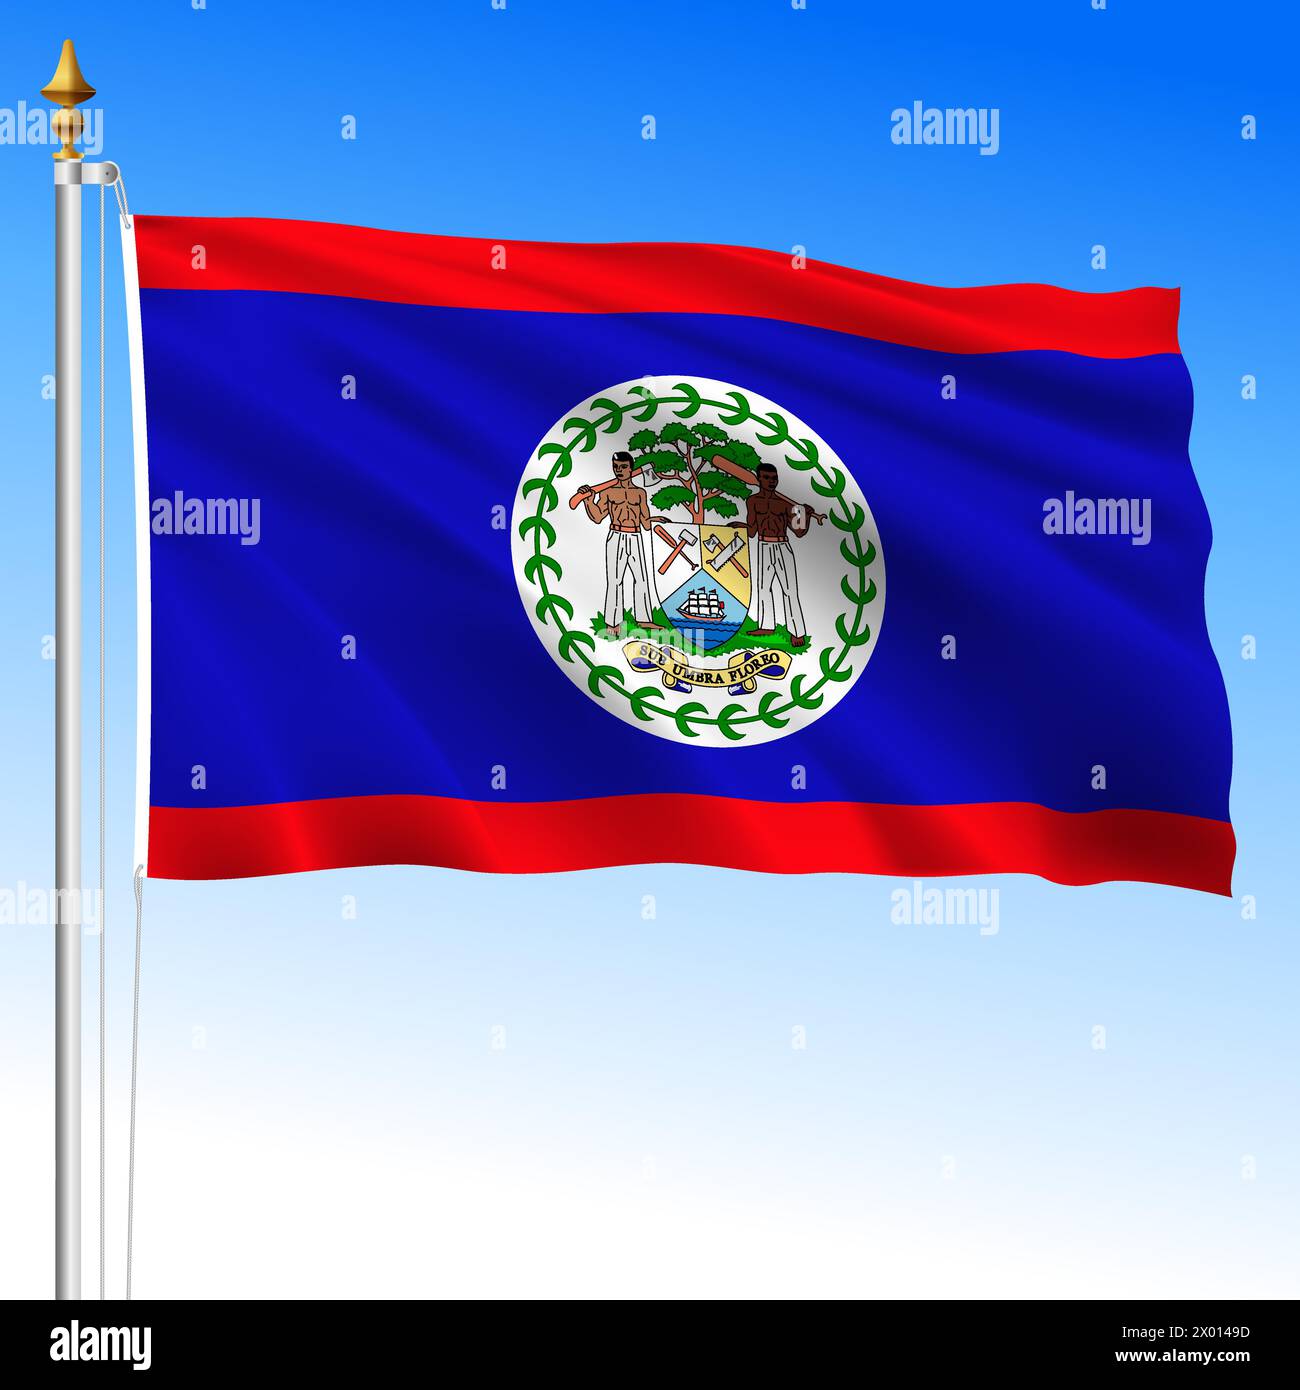 Belize official national waving flag, central american country, vector illustration Stock Vector